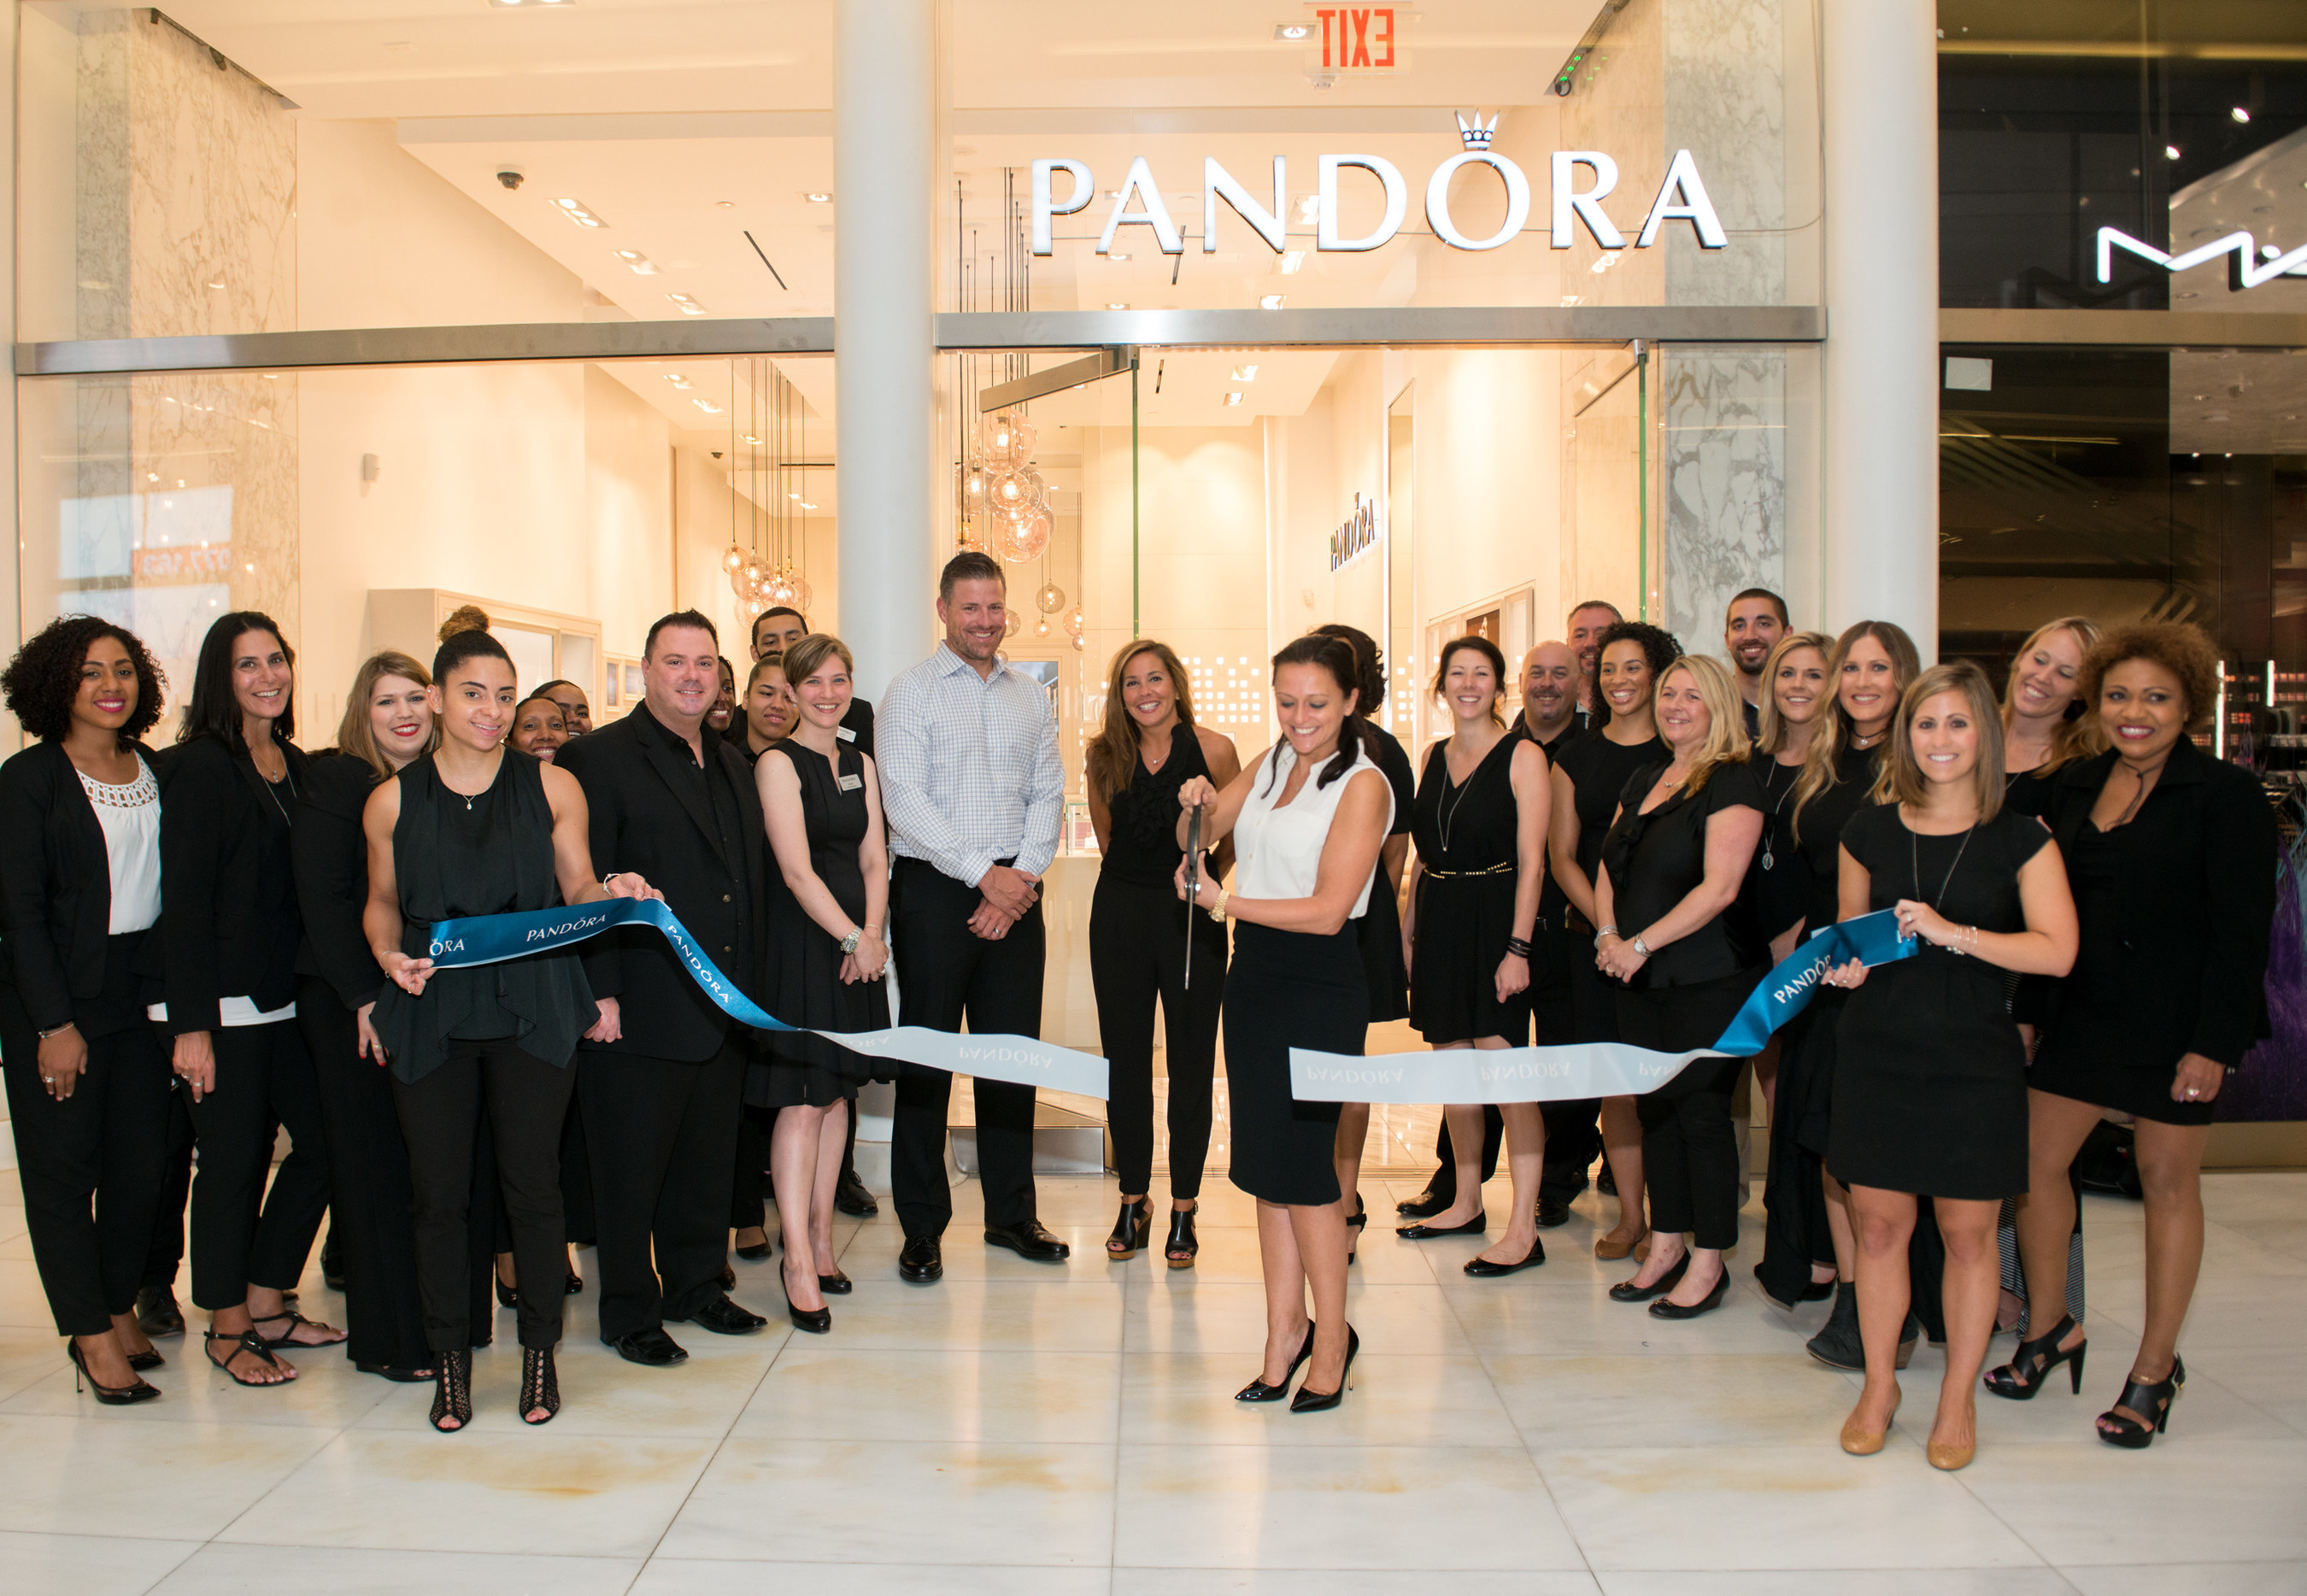 Laurie McDonald, General Manager, PANDORA Jewelry, U.S. Cuts Ribbon in Honor of PANDORA World Trade Center Grand Opening